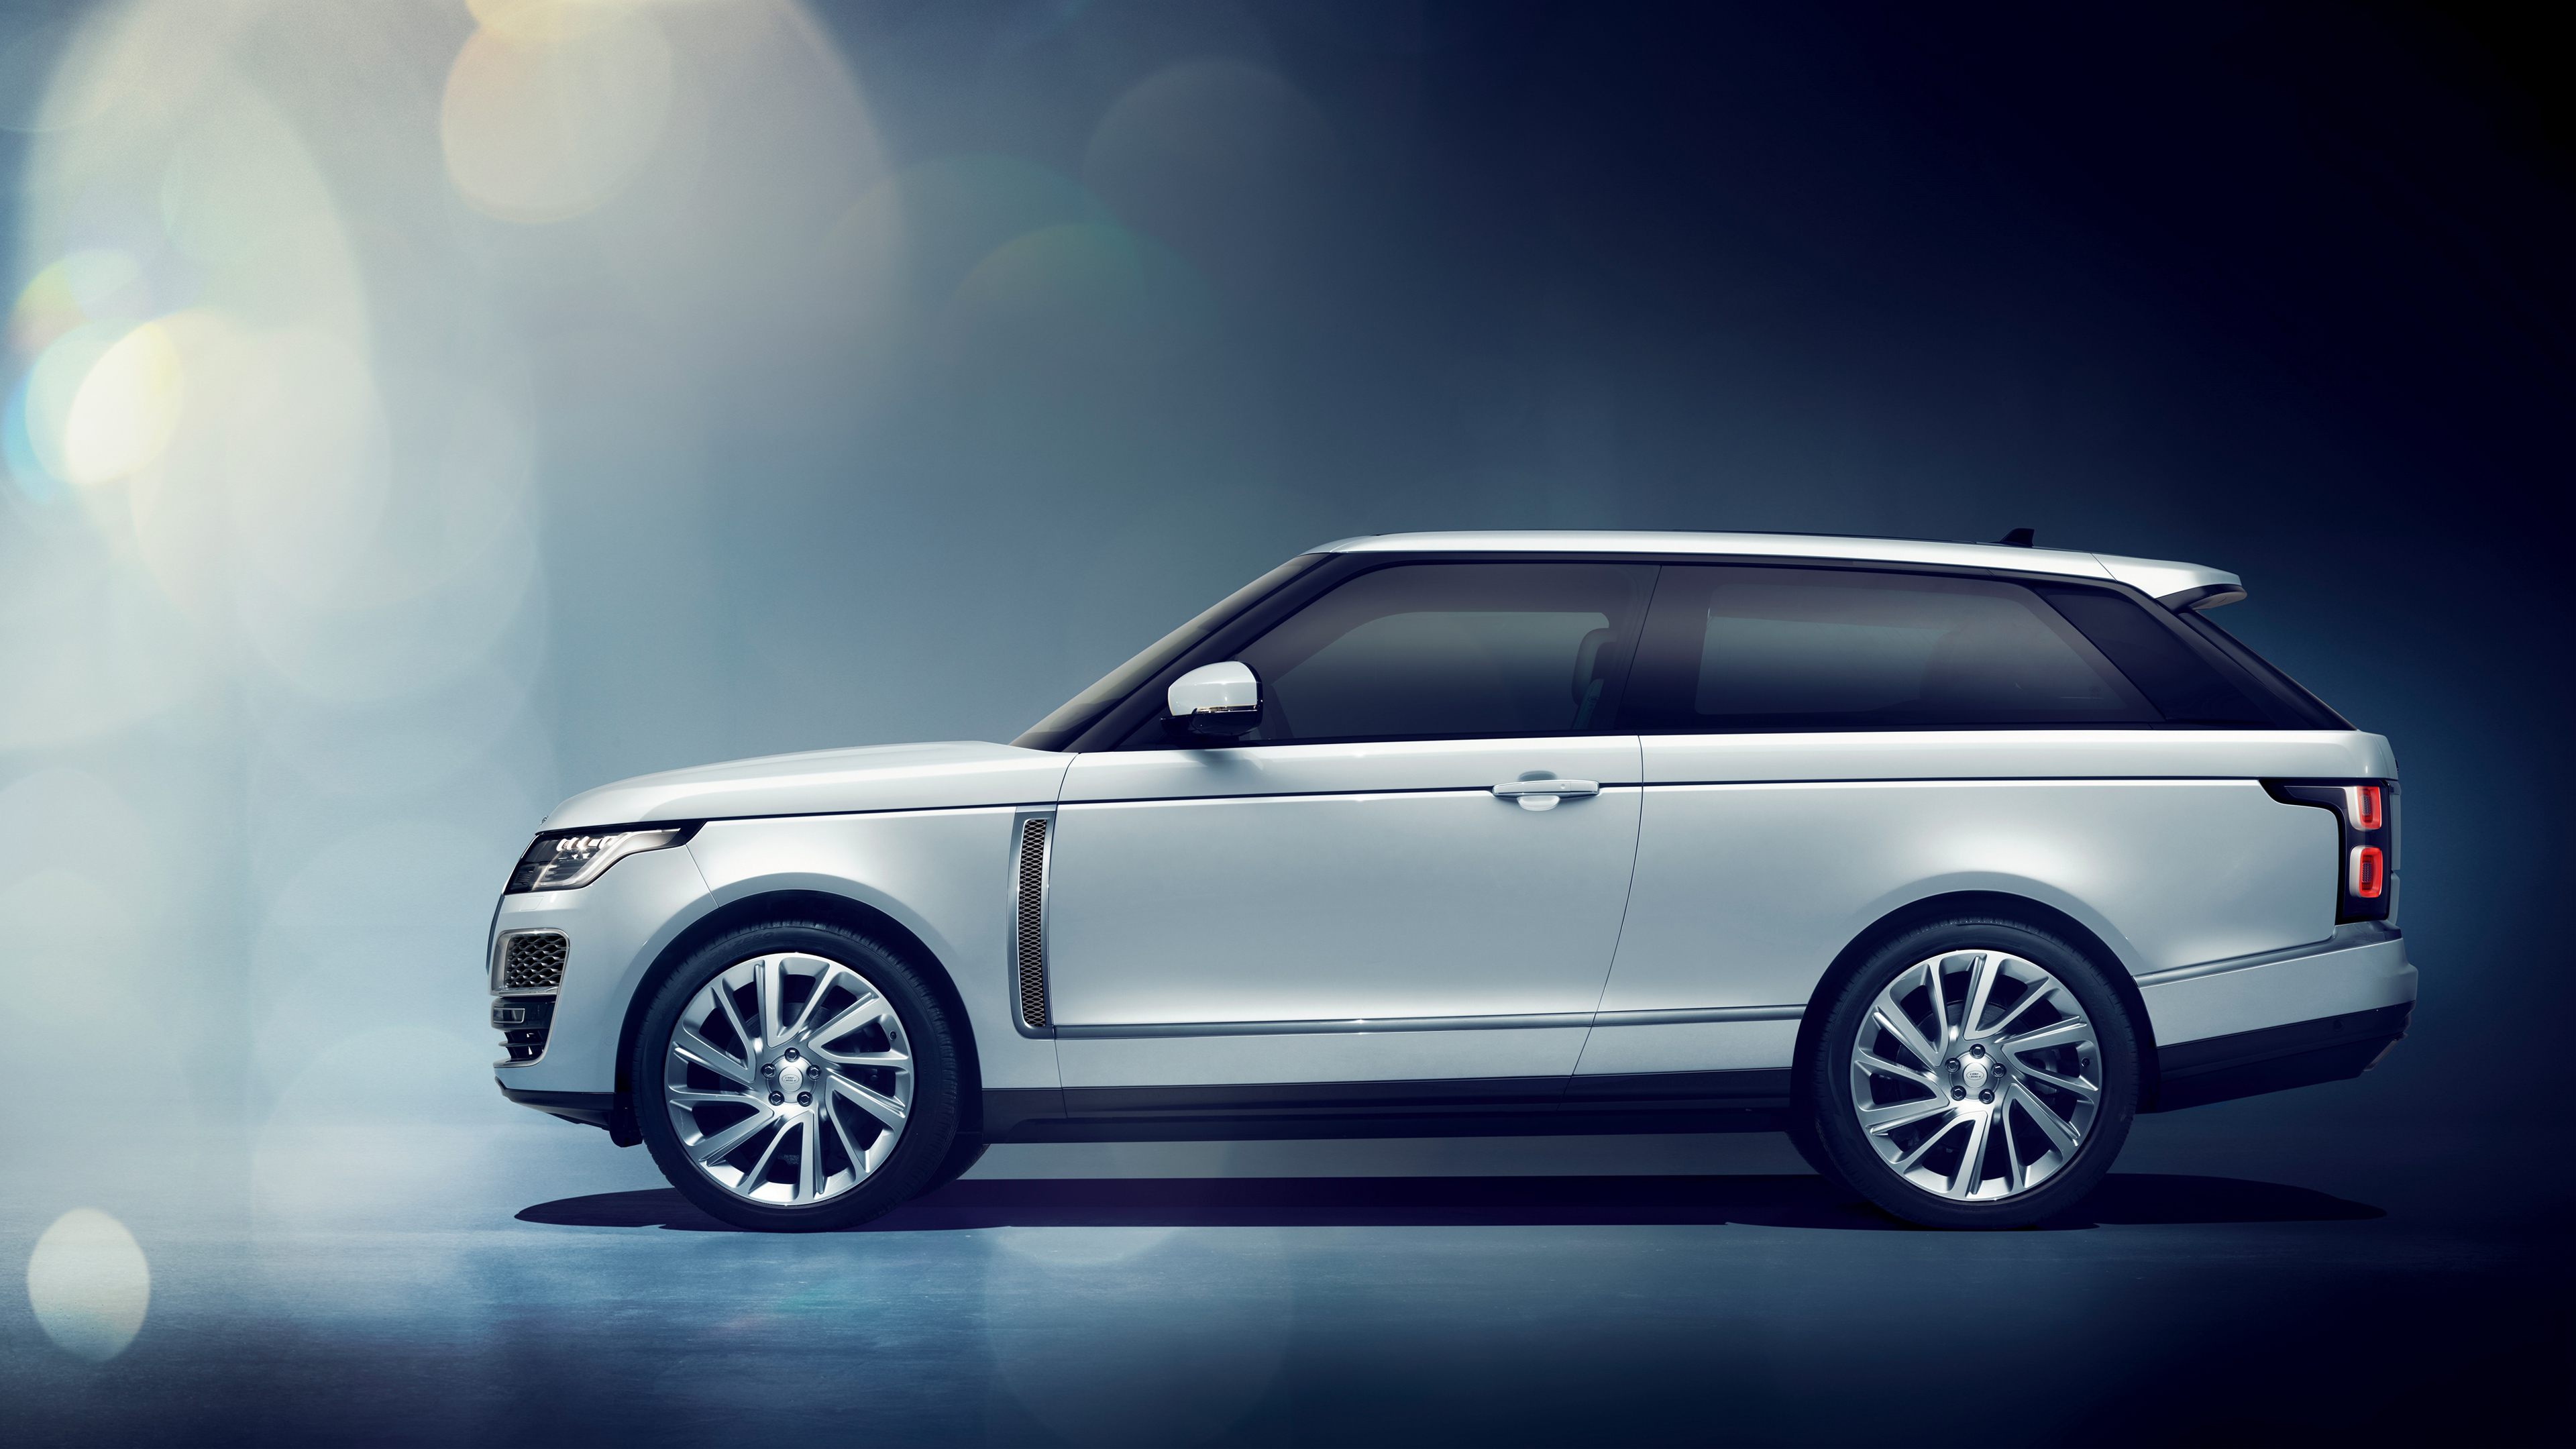 2018 Range Rover SV Coupe 4K Wallpaper HD Car Wallpapers